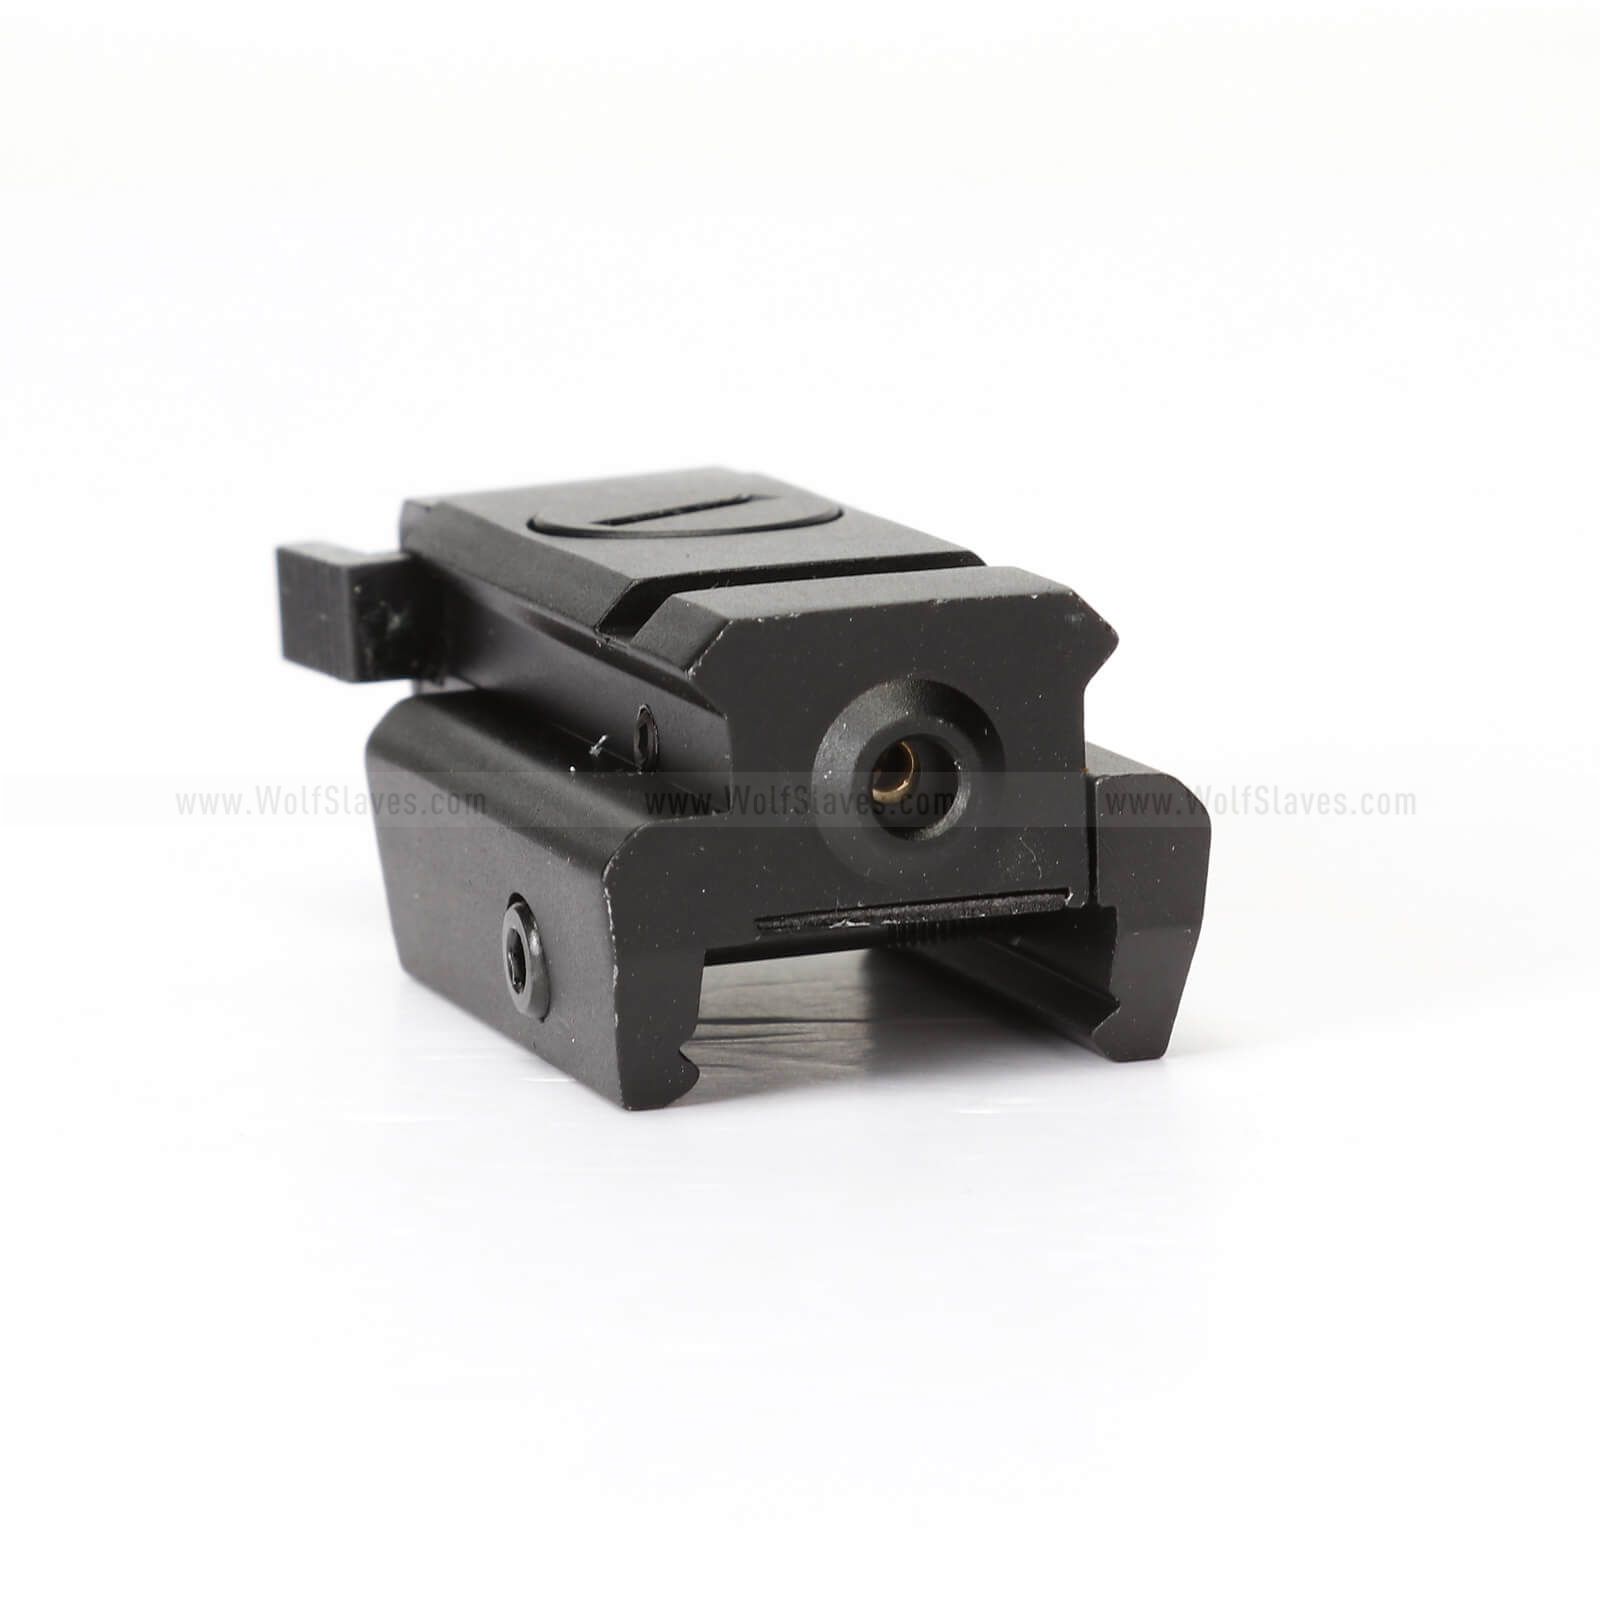 2Pcs Red Dot Laser Sight Low Profile Picatinny Rail Mount 20mm For Rifle Pistol 